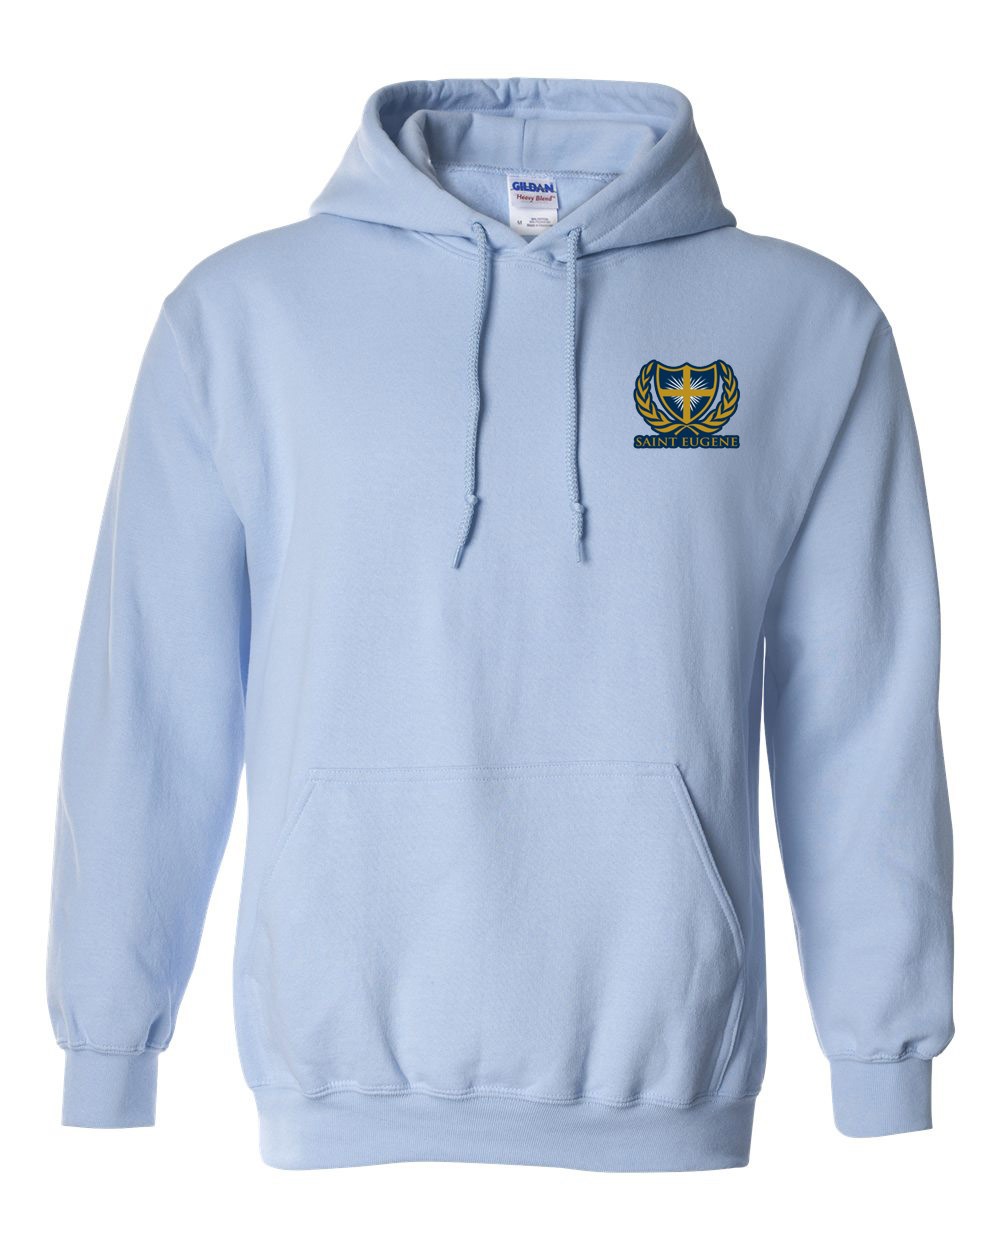 SES Light Blue Staff Pullover Hoodie w/ Logo - Please Allow 2-3 Weeks for Delivery